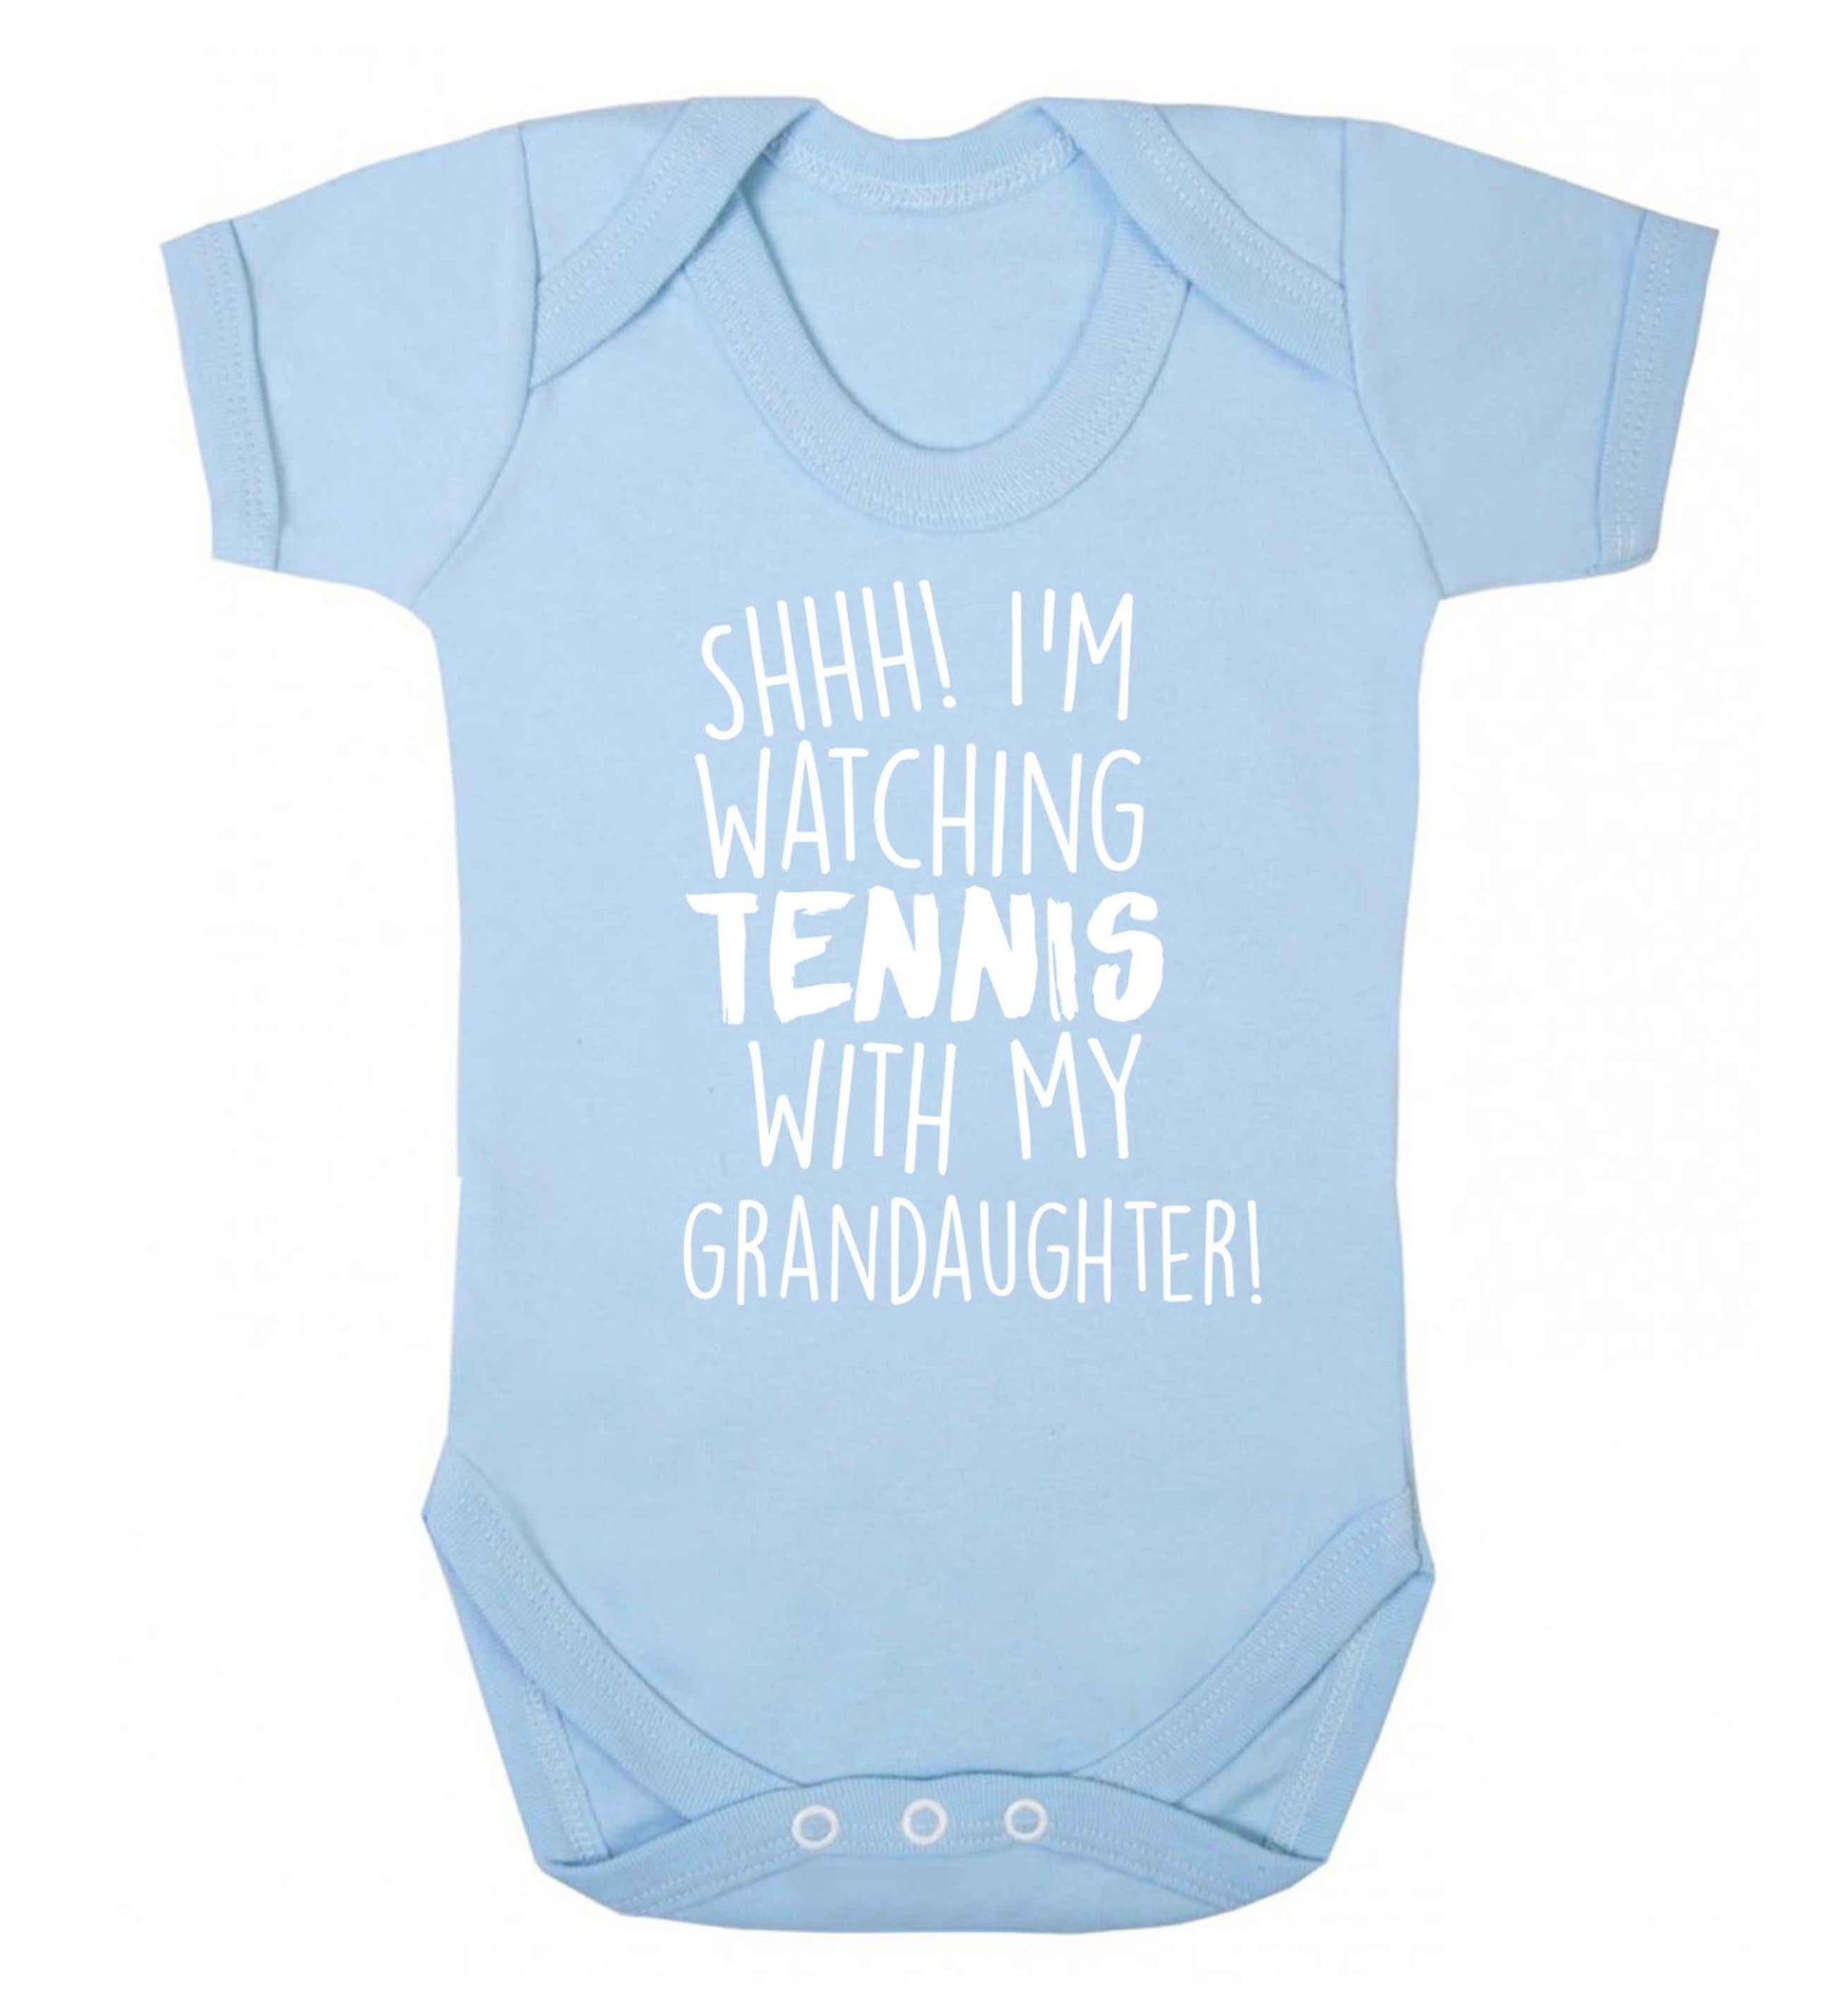 Shh! I'm watching tennis with my granddaughter! Baby Vest pale blue 18-24 months